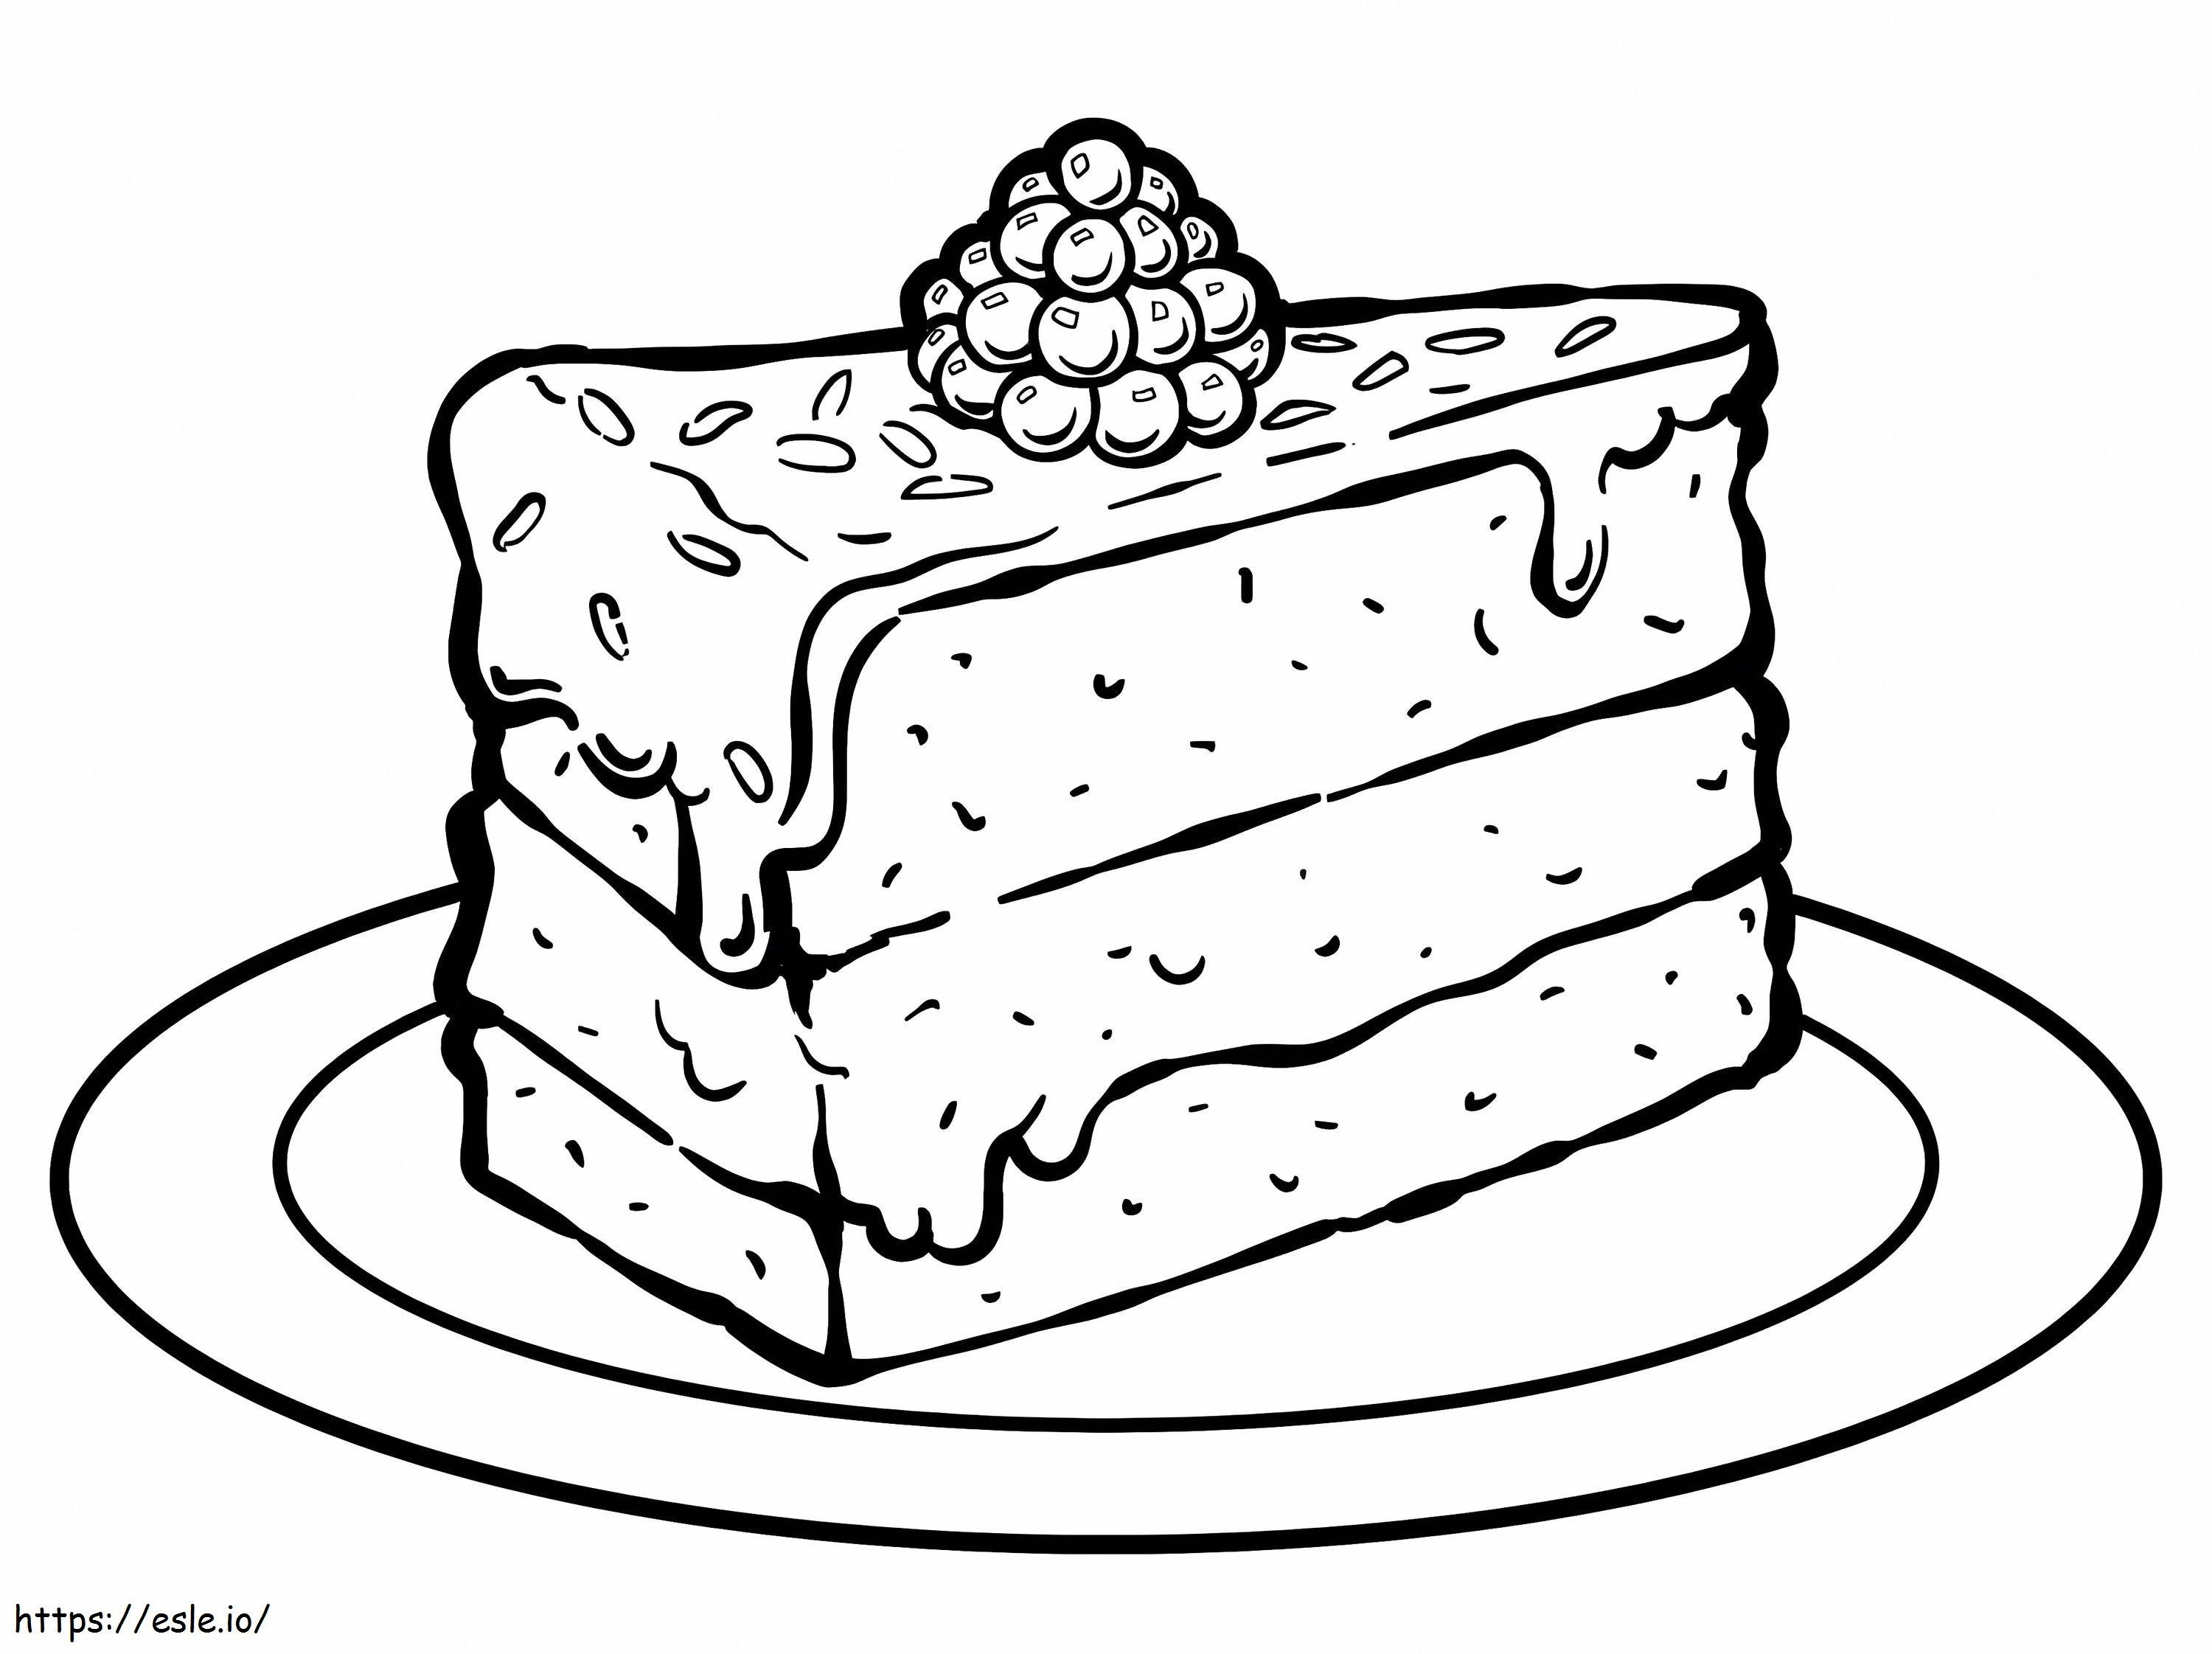 Blueberry Cake coloring page